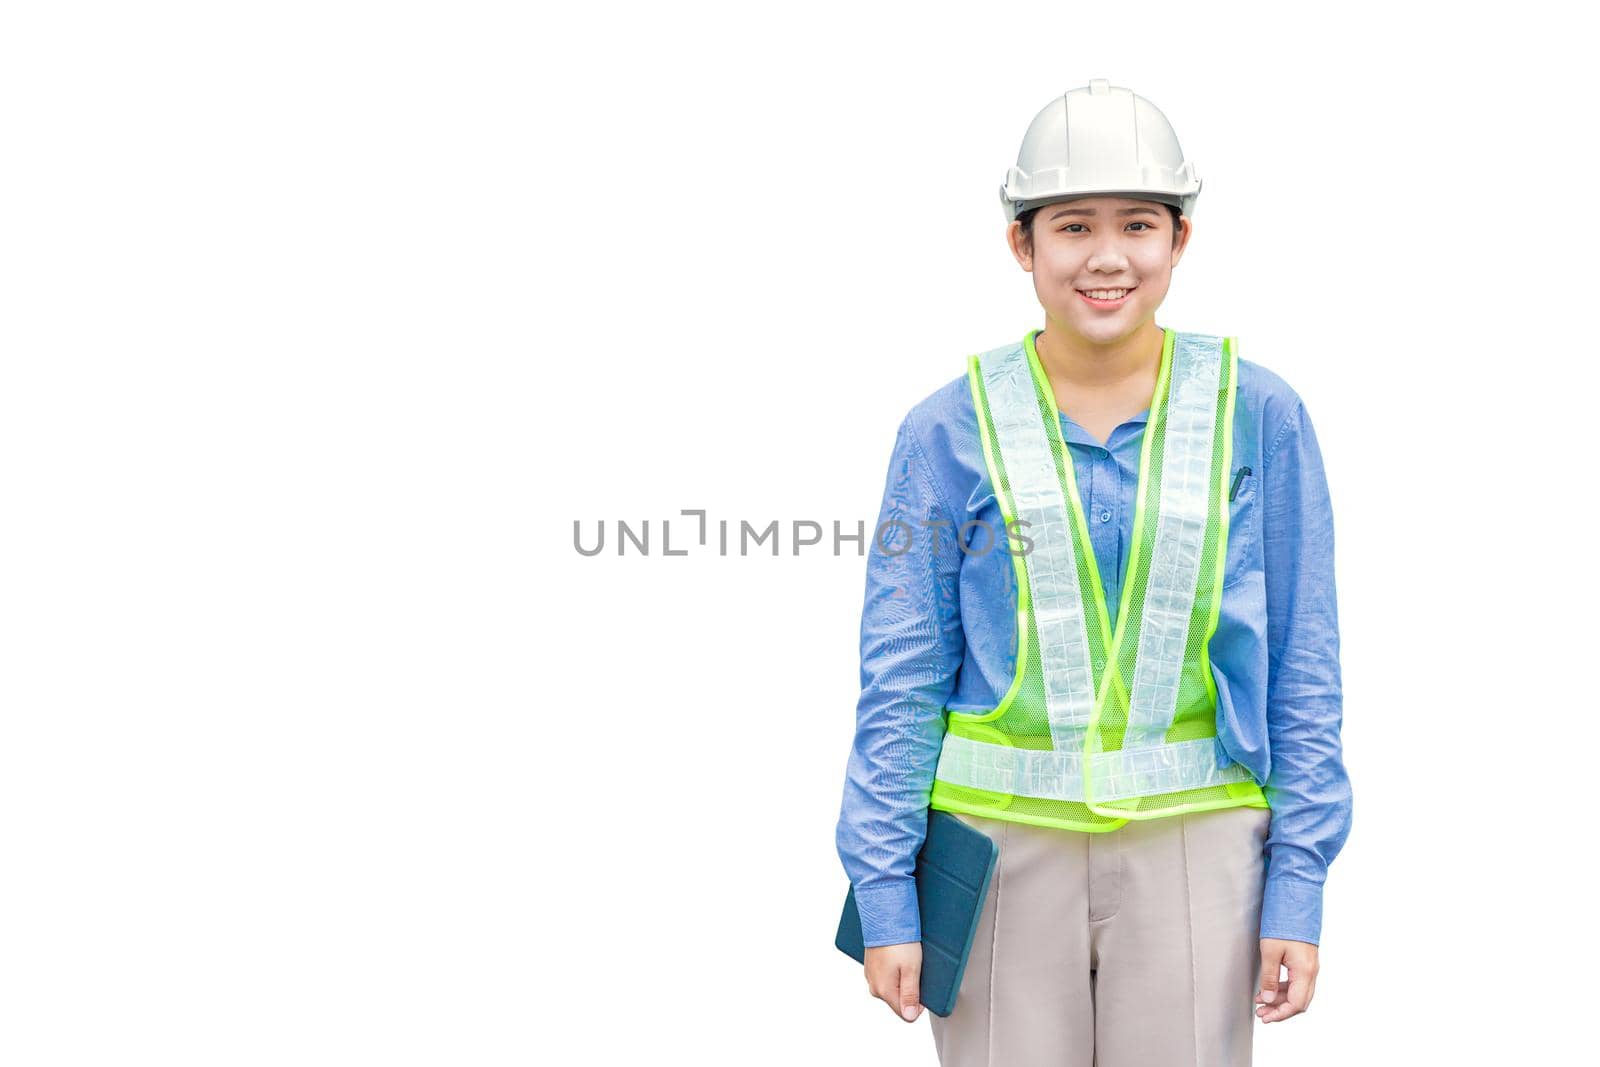 Asian woman worker industry staff foreman engineer waring safety vest reflective strip helmet hardhat smiling isolated on white background